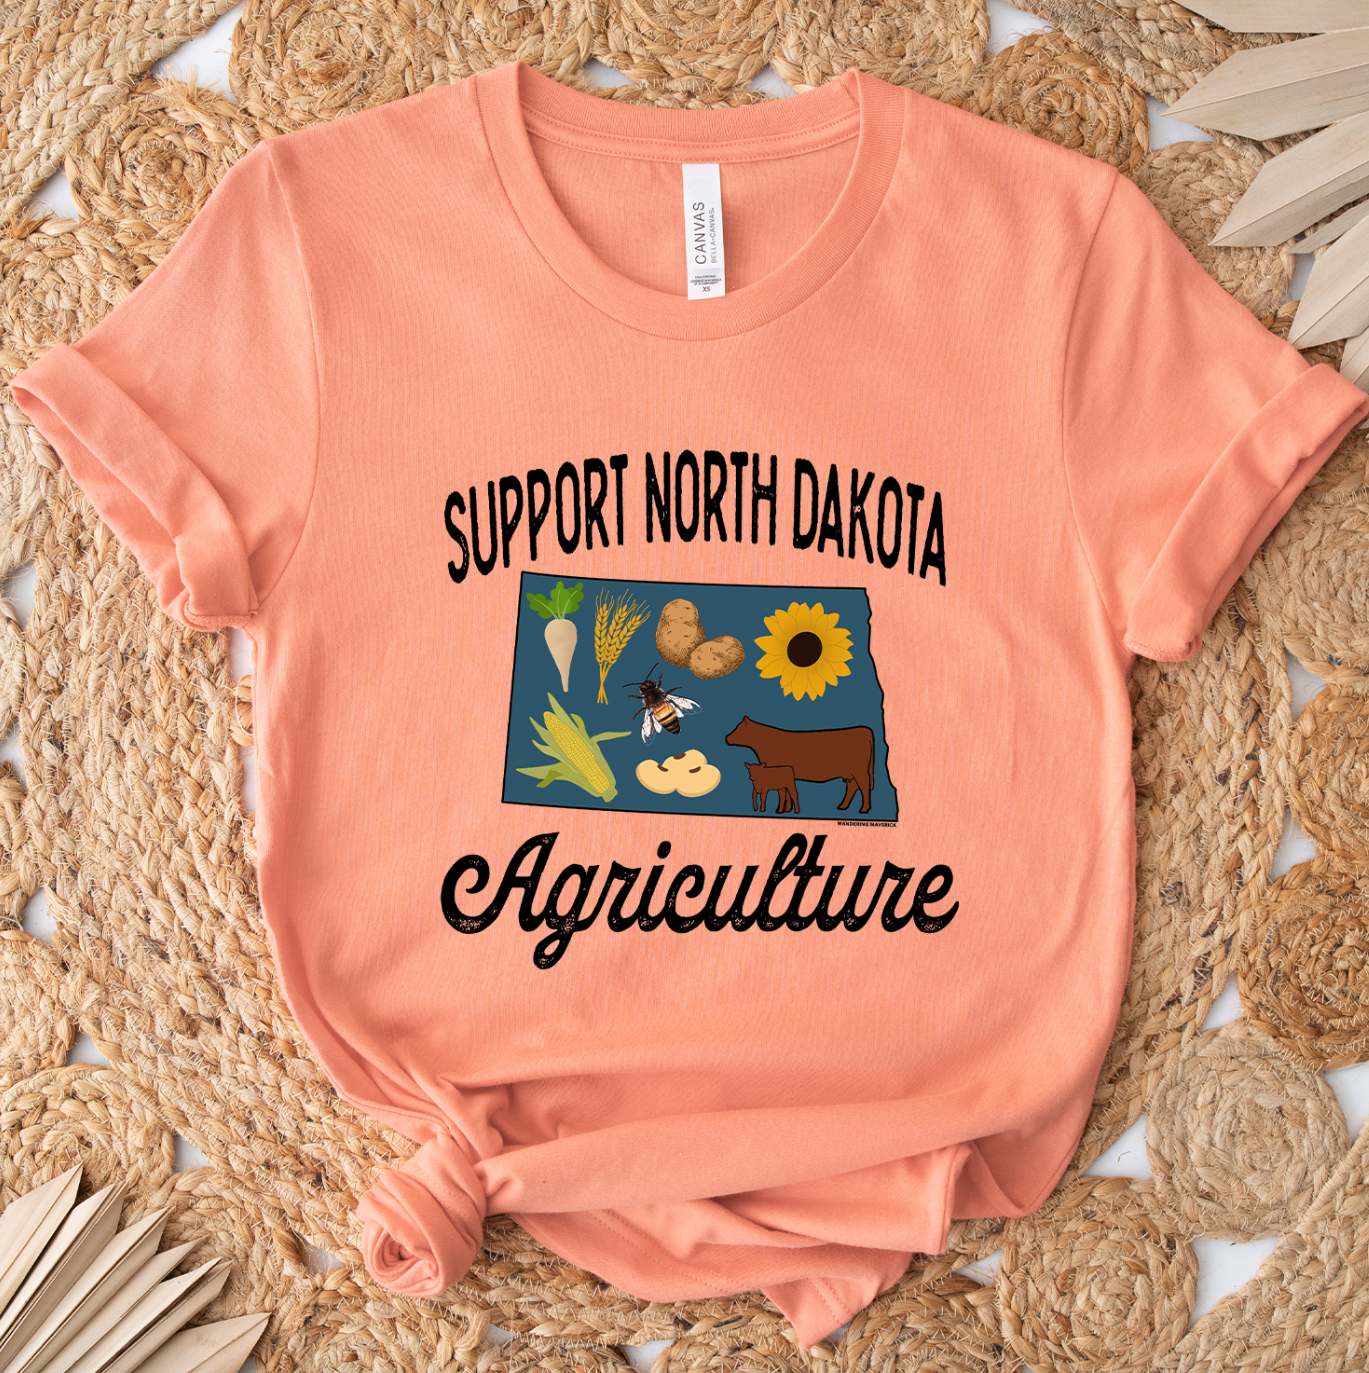 Support North Dakota Agriculture T-Shirt (XS-4XL) - Multiple Colors!